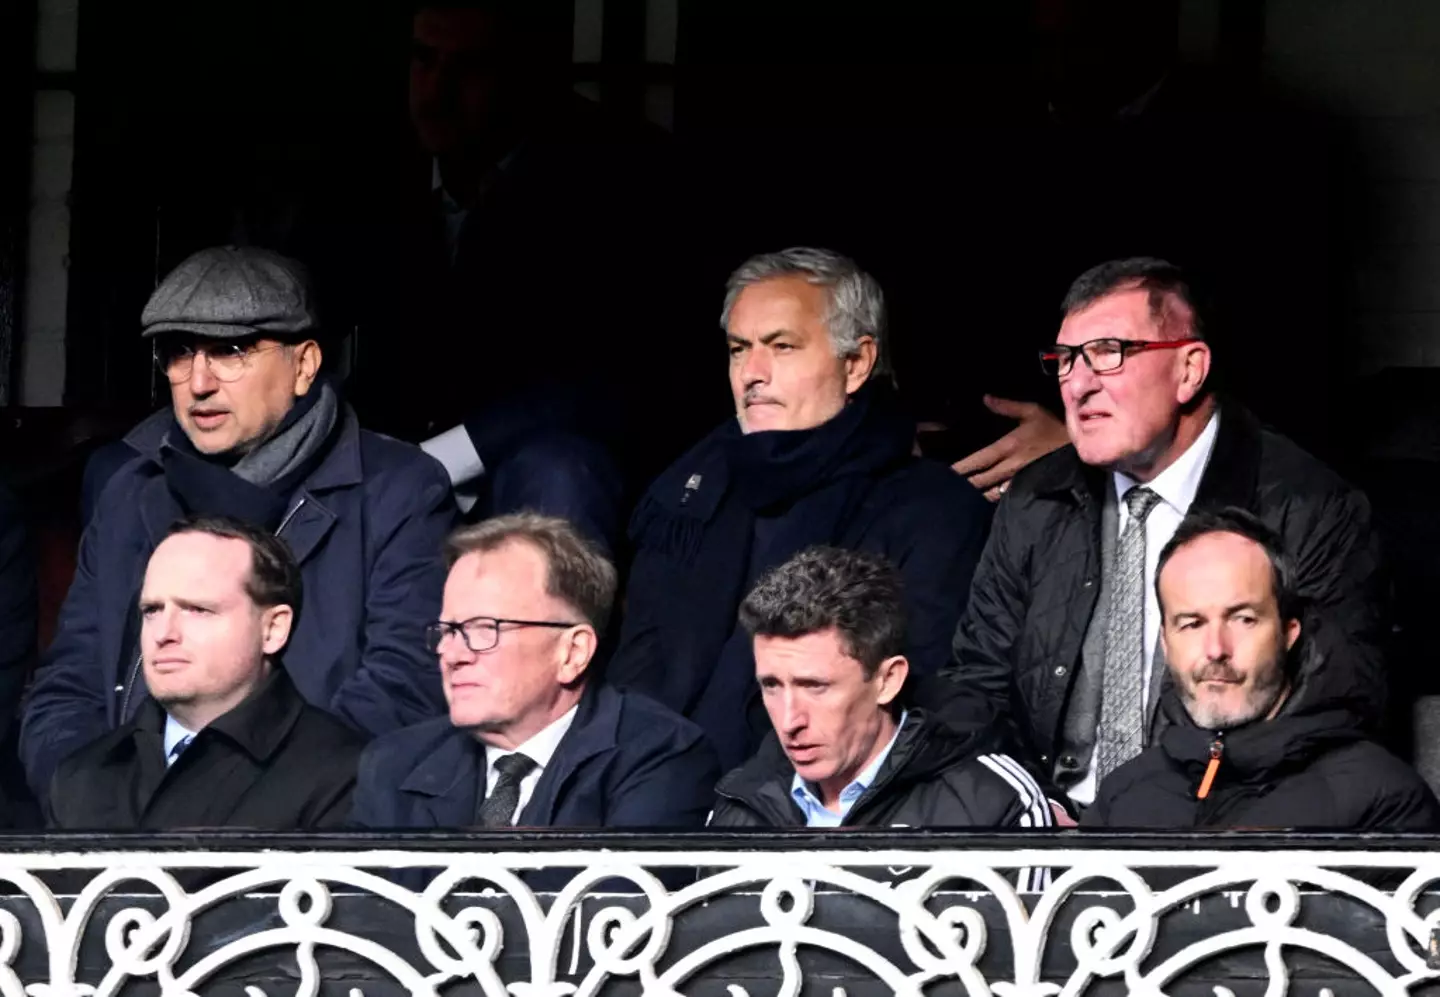 Jose Mourinho was at Craven Cottage for Sunday's Premier League clash between Fulham and Liverpool (